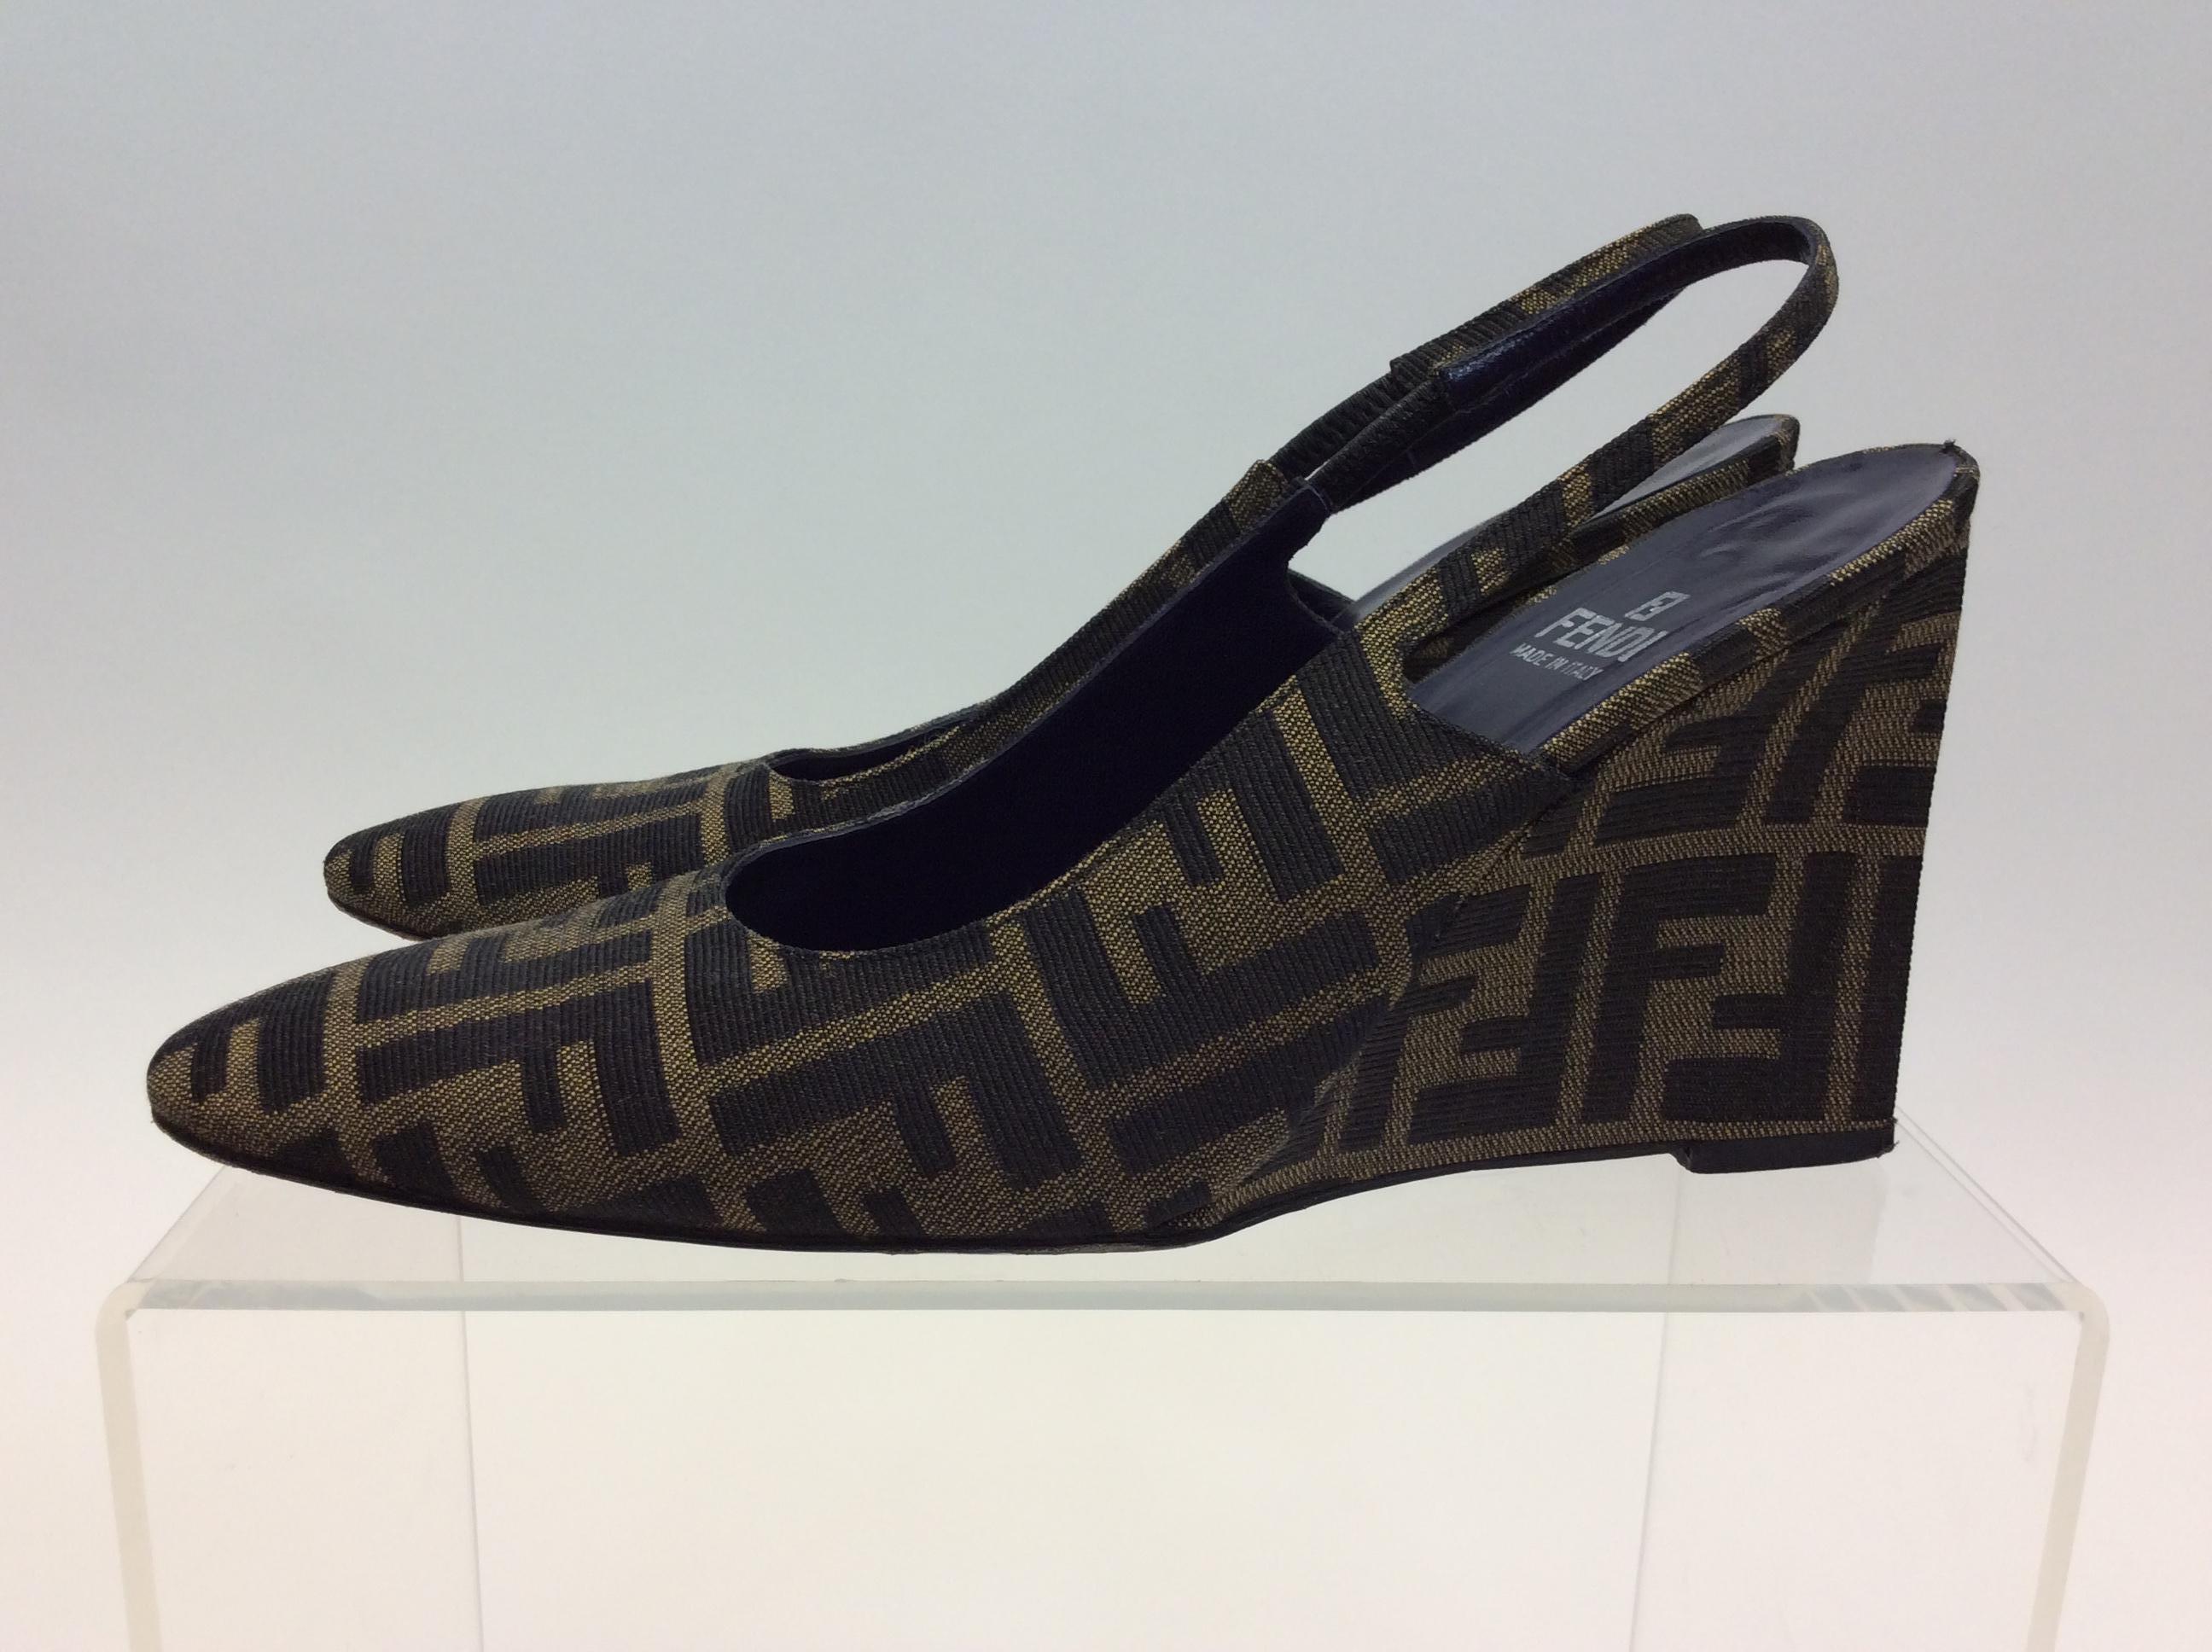 Fendi Monogram Brown Wedge
Made in Italy
Size 8
3.5